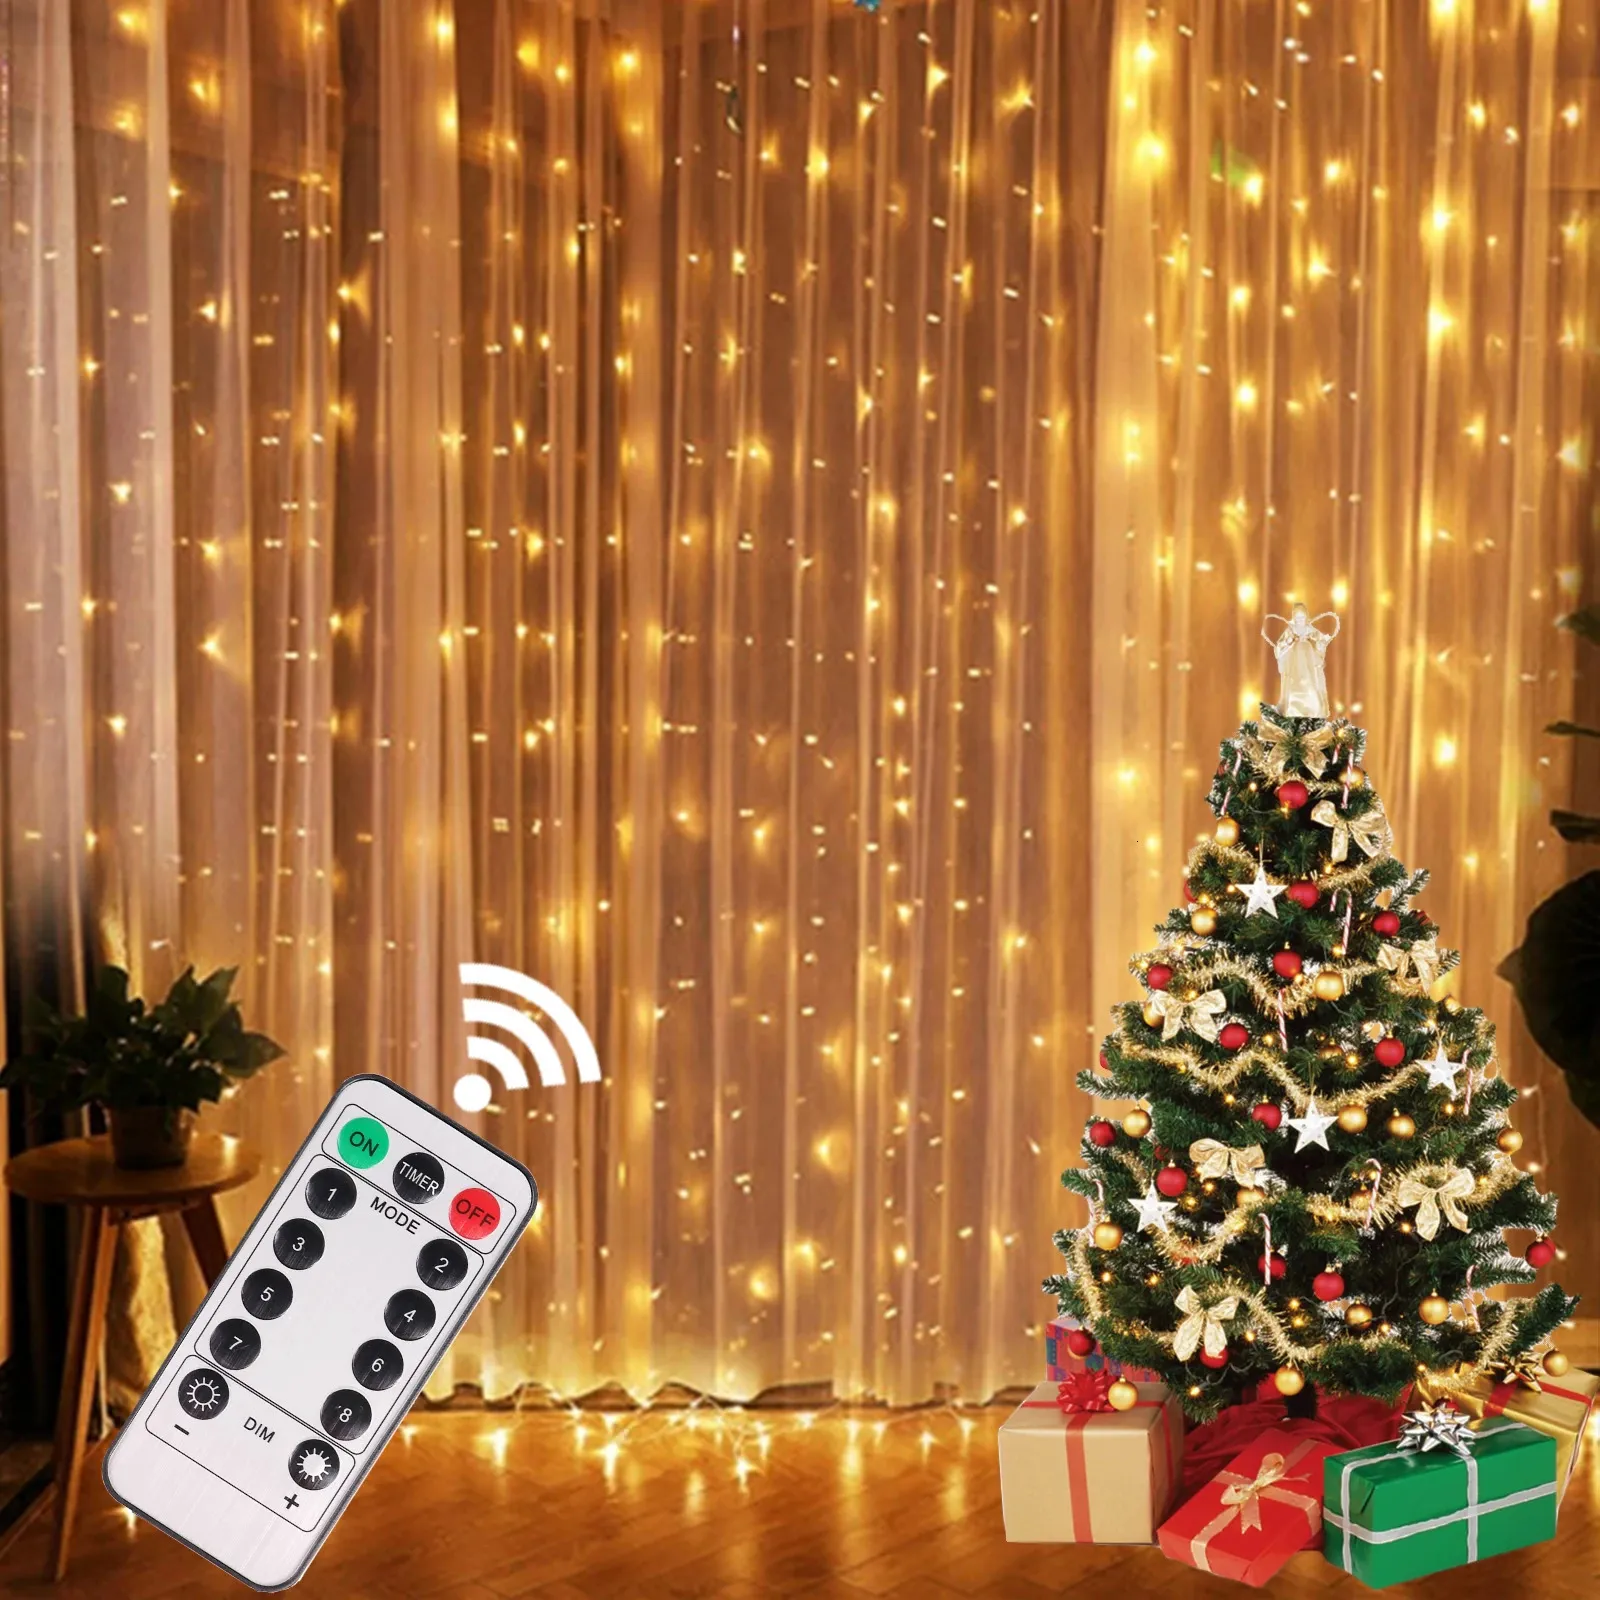 Other Event Party Supplies Christmas Lights Curtain Garland Merry Decorations For Home Ornaments Xmas Gifts Navidad Year Decor 230422